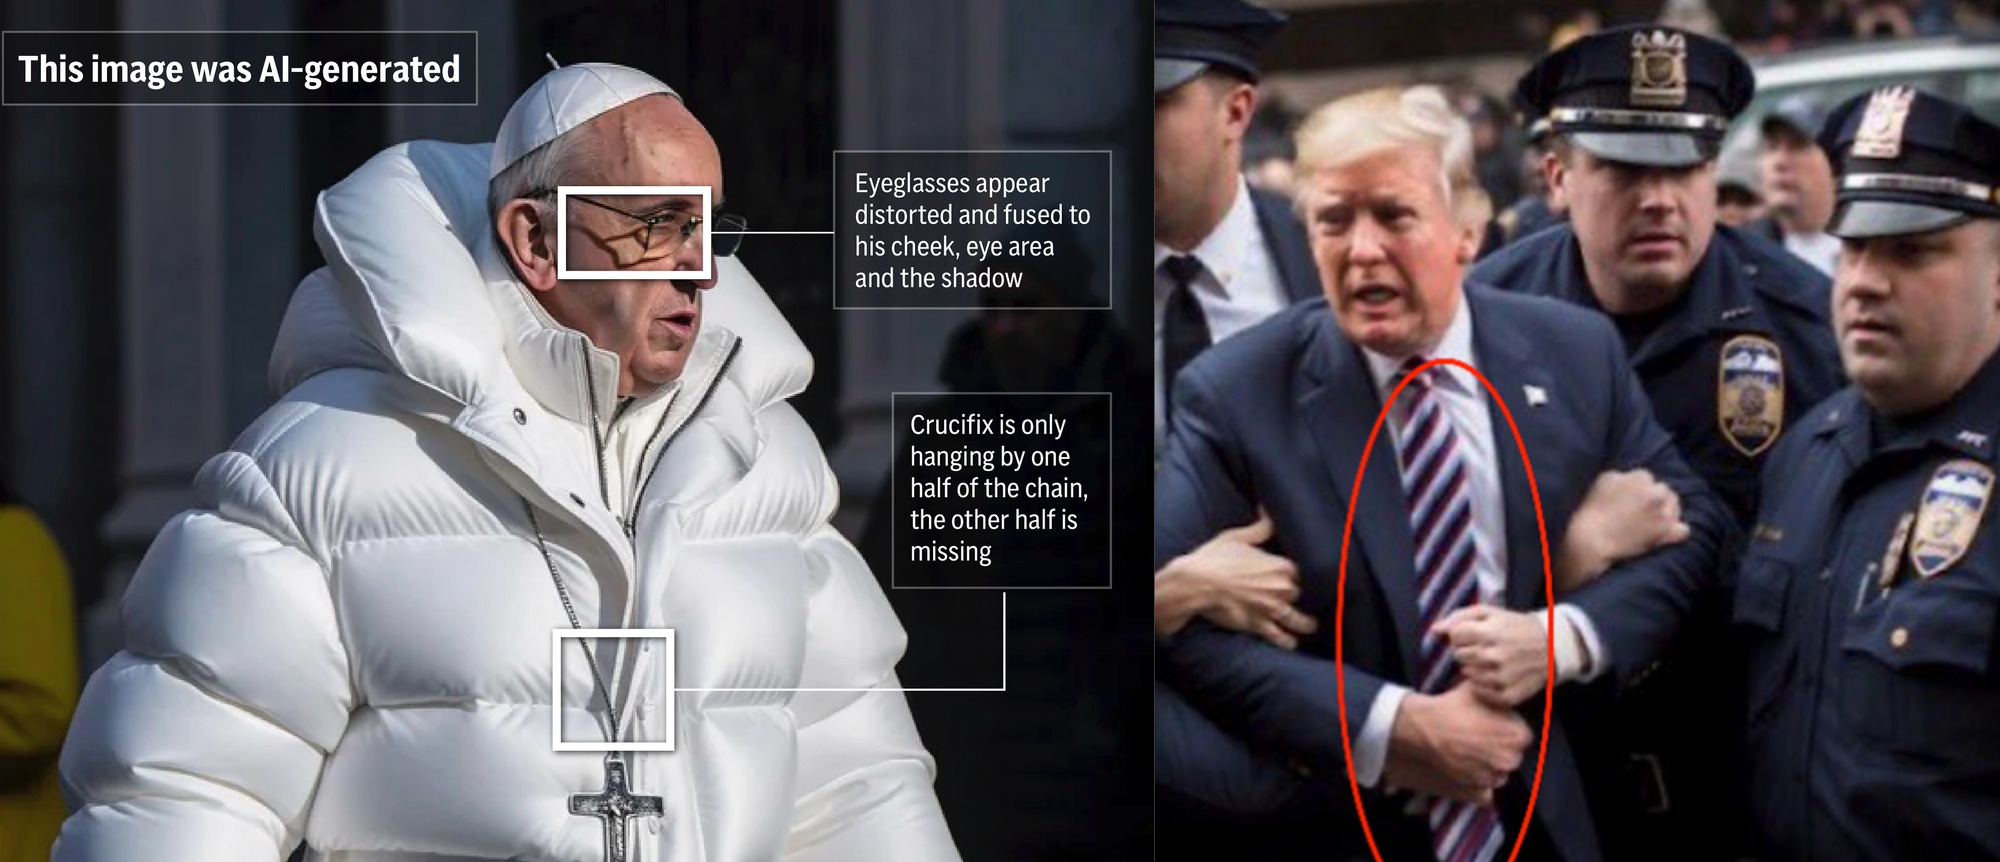  Fake images. On the left, a fake illustration of Pope Francis. On the right, a fake of presumptive US presidential candidate Donald Trump. Photos from NTB/Phil Holm and Faktisk.no
